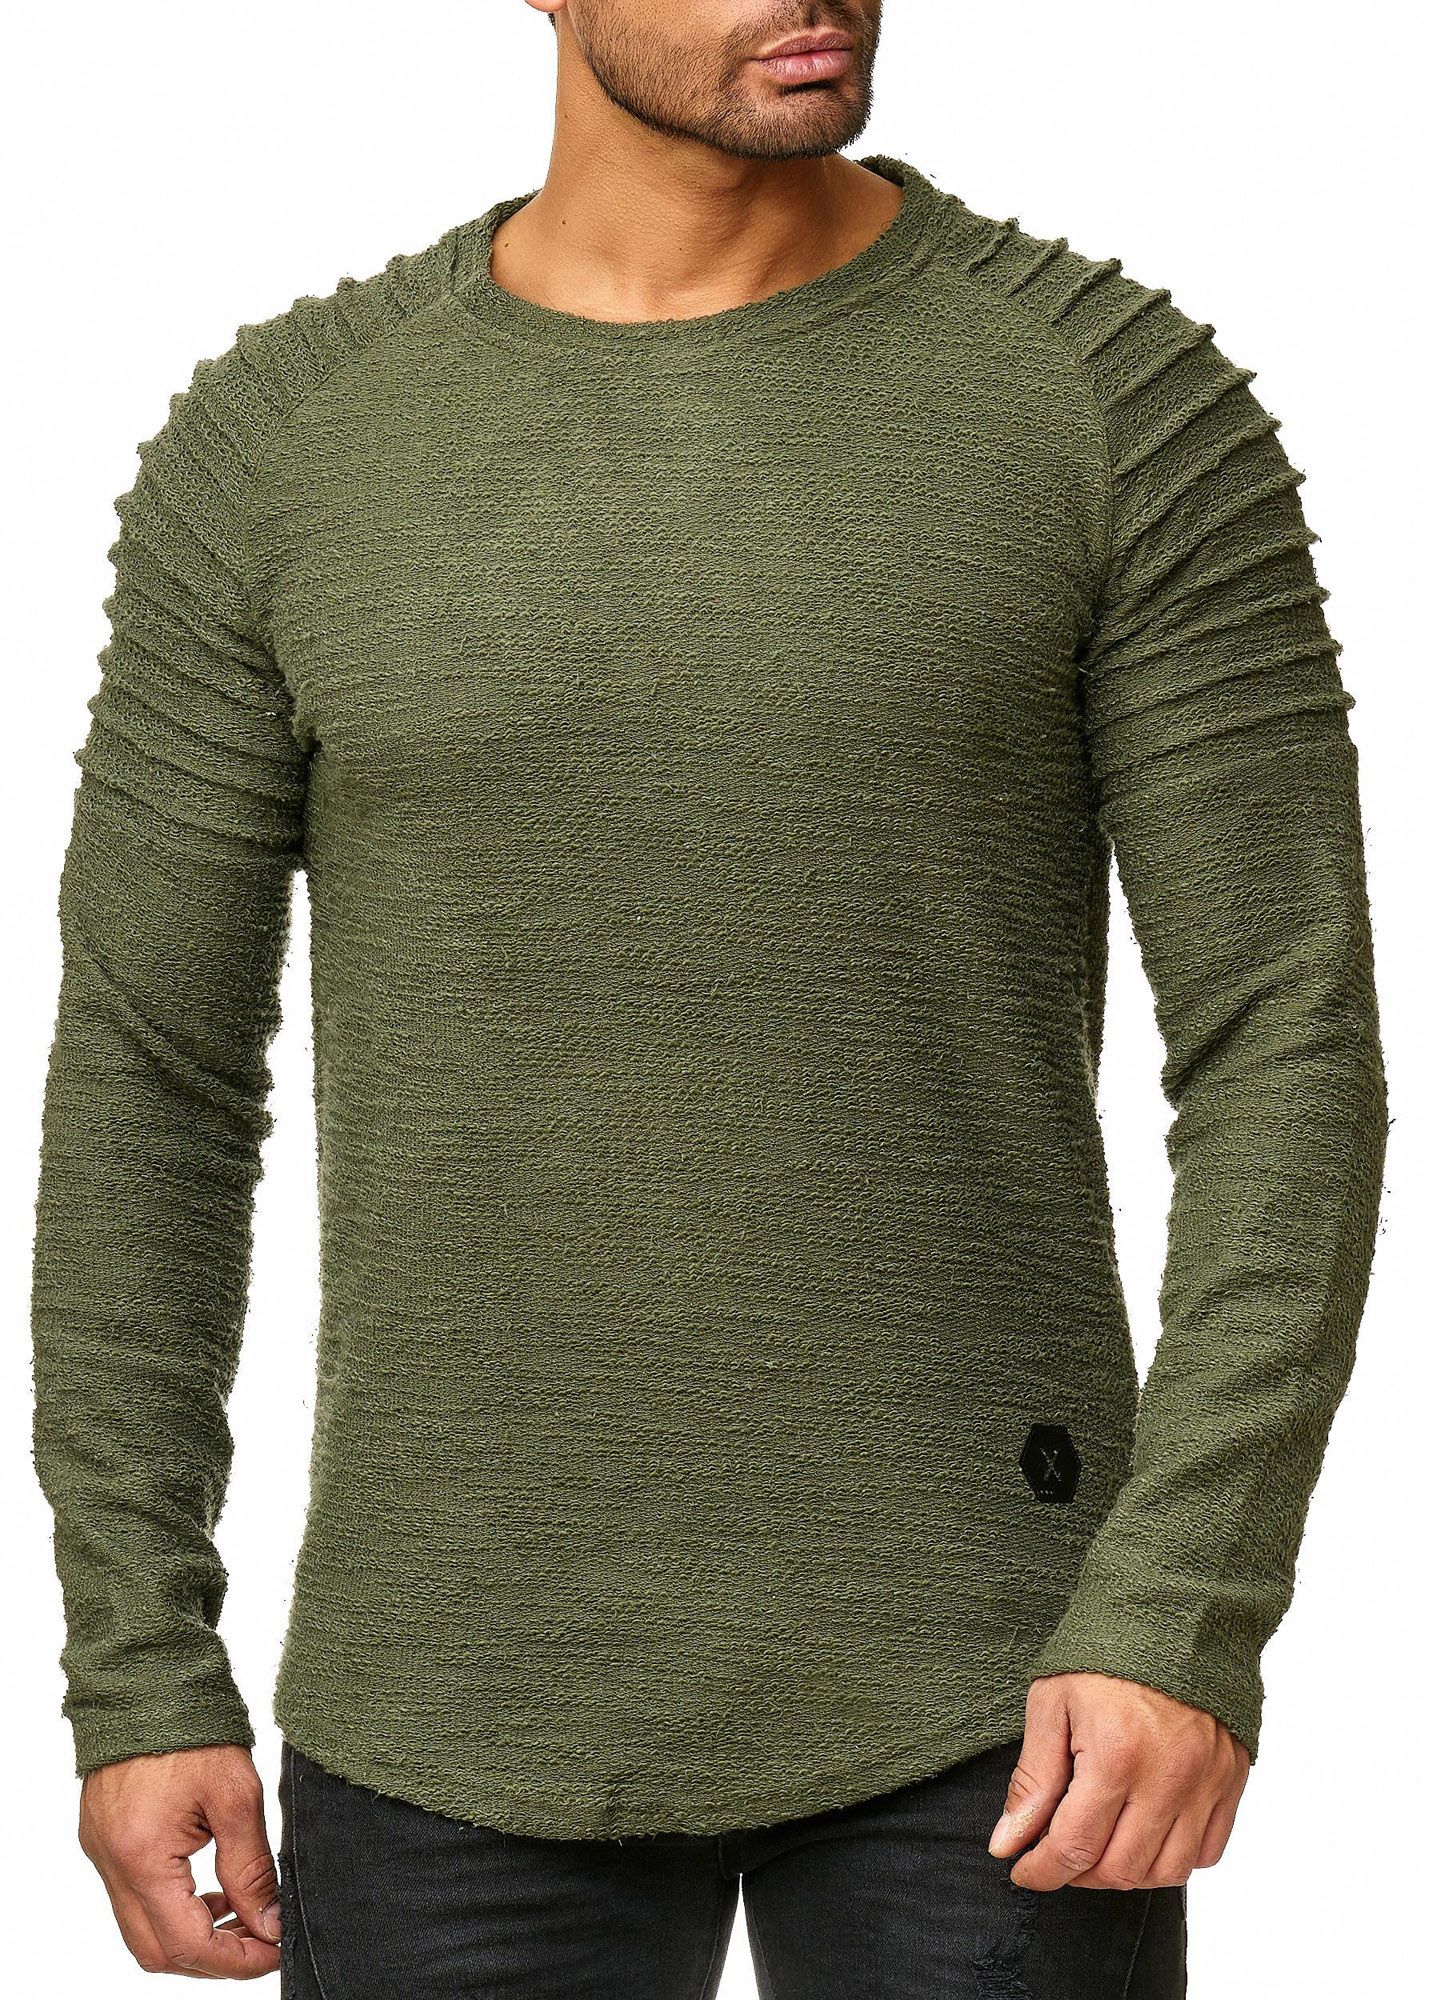 Limitless Green Structure Jerone - 1261 - Long Sleeves - Jerone.com